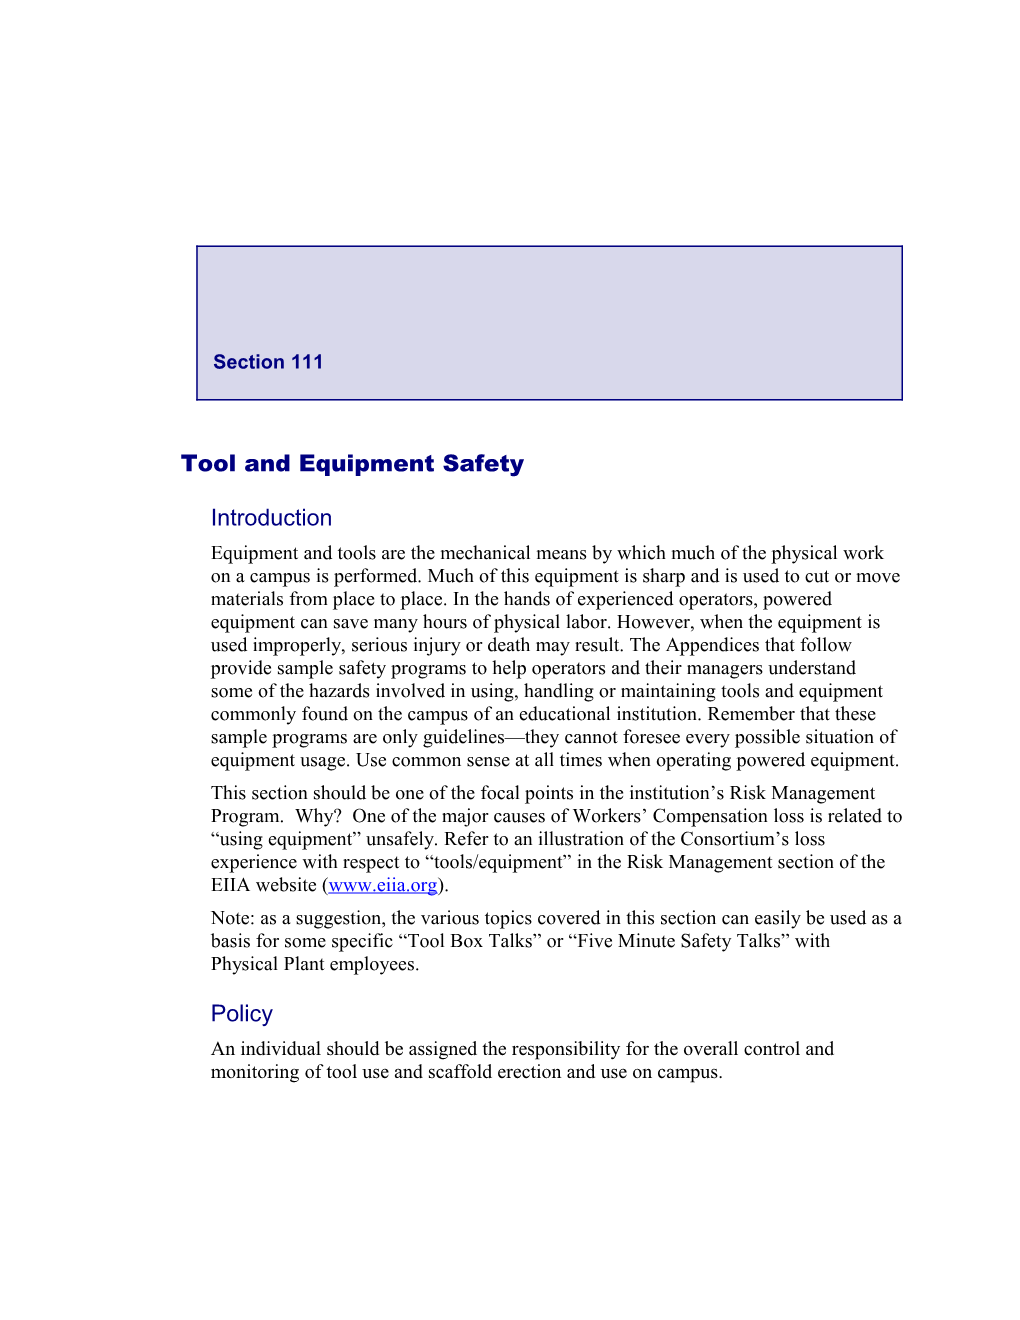 Tool and Equipment Safety